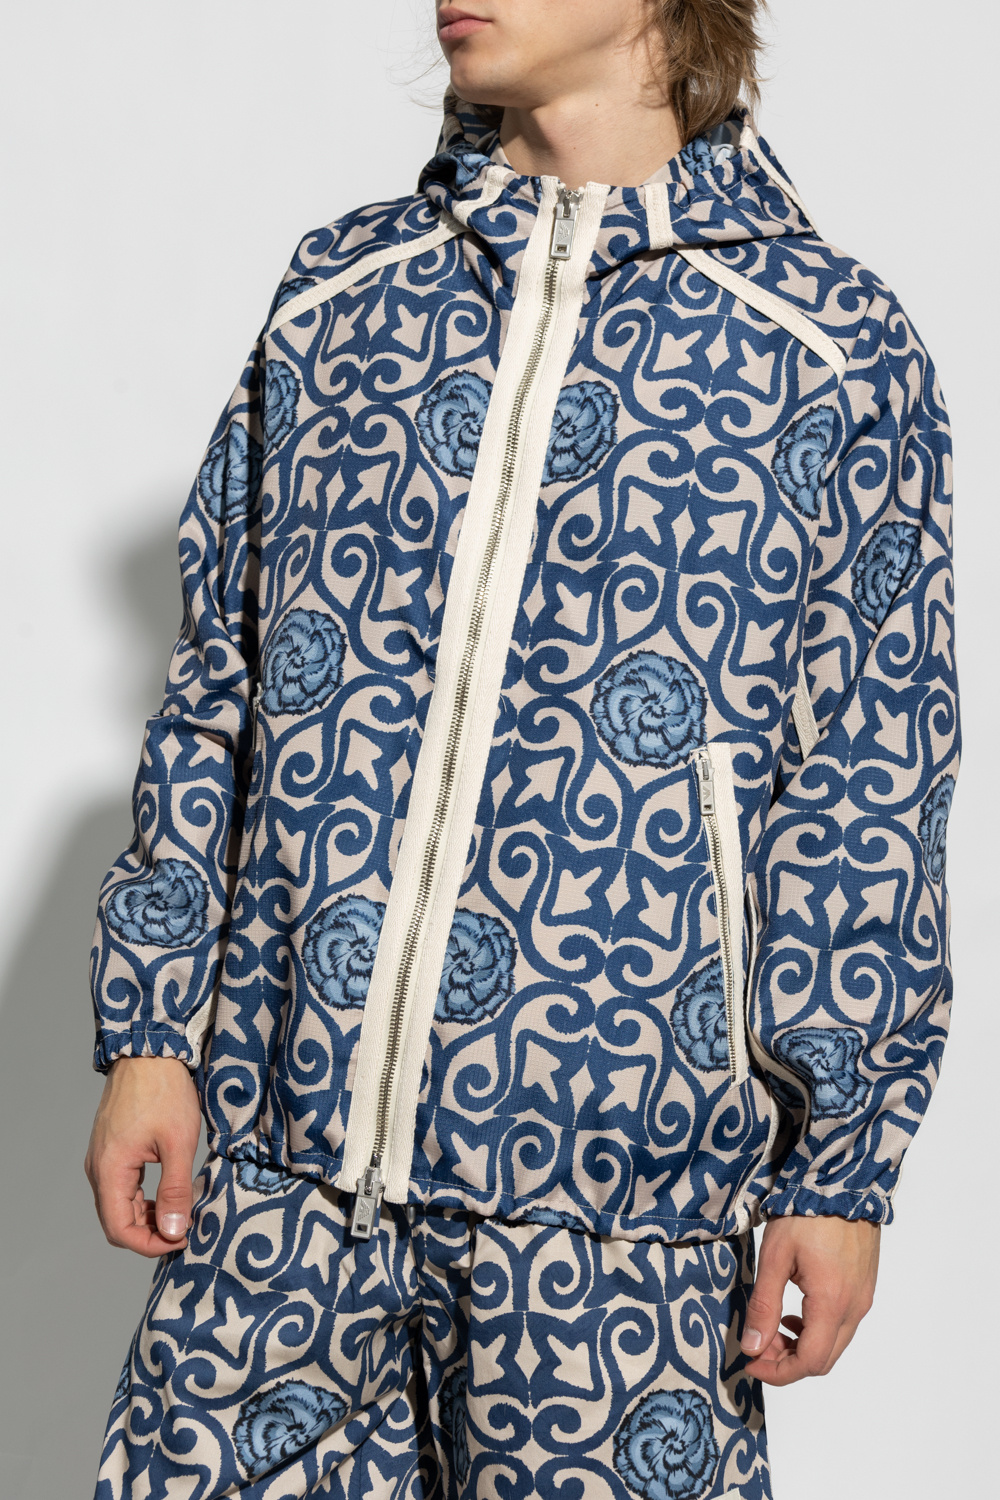 Emporio XK203 armani Jacket from the ‘Sustainable’ collection